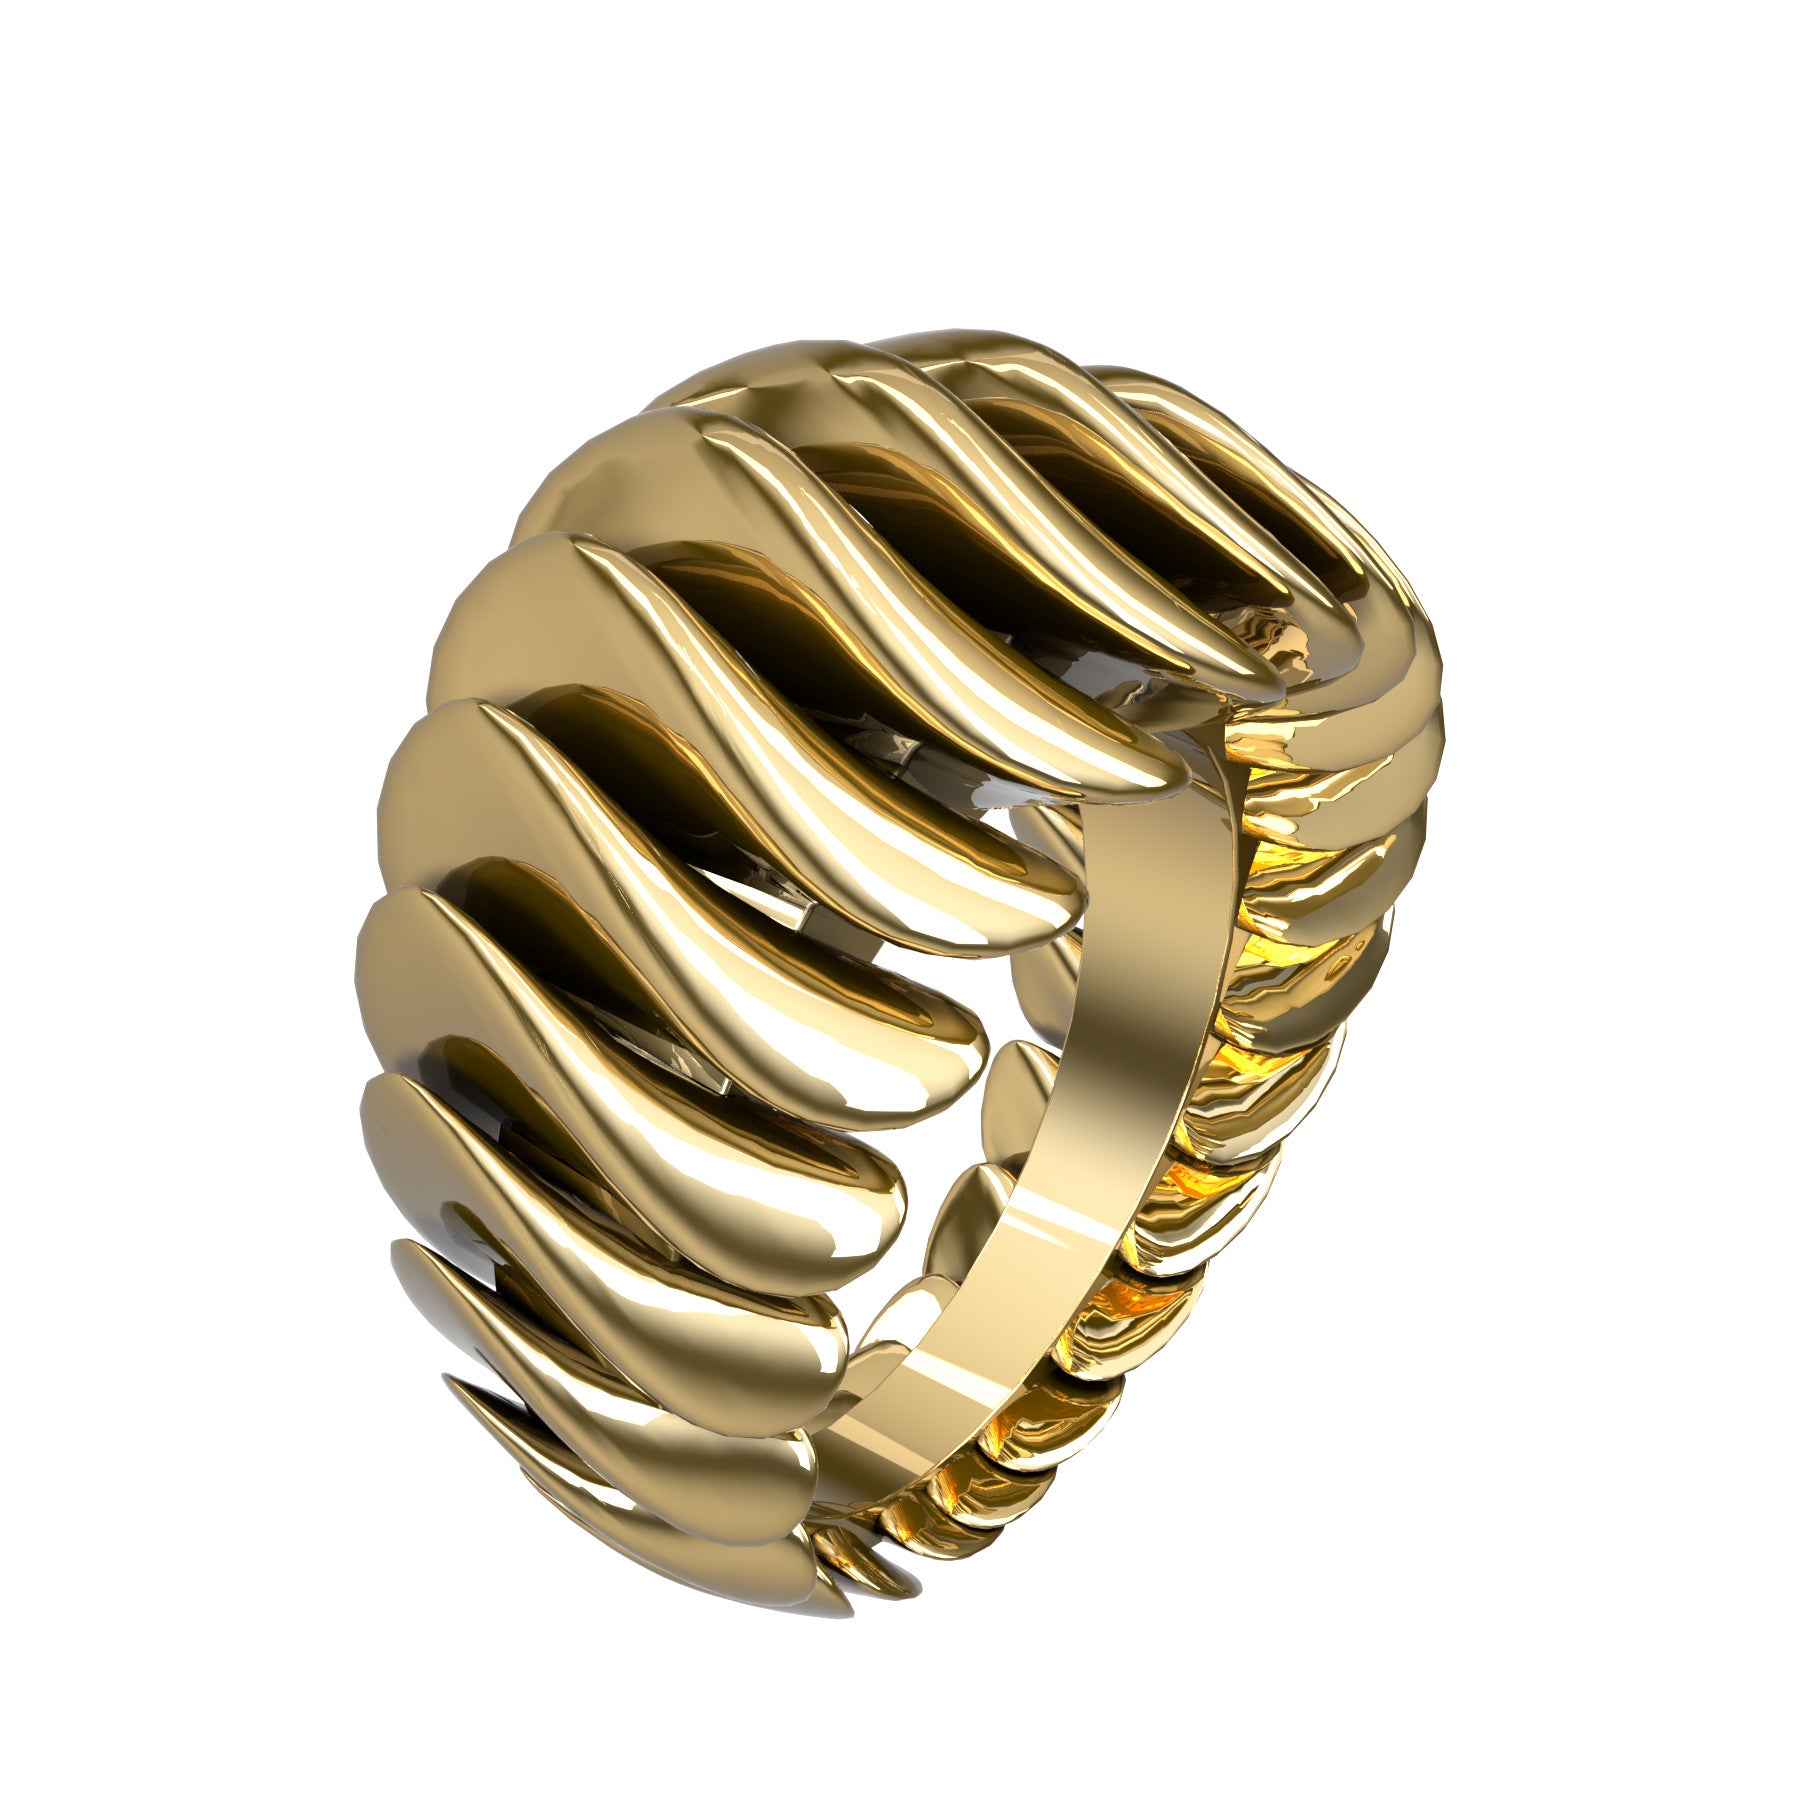 curvy ring, 18 K yellow gold, weight about 20,3 g. (0.71 oz), width 14,6 mm max